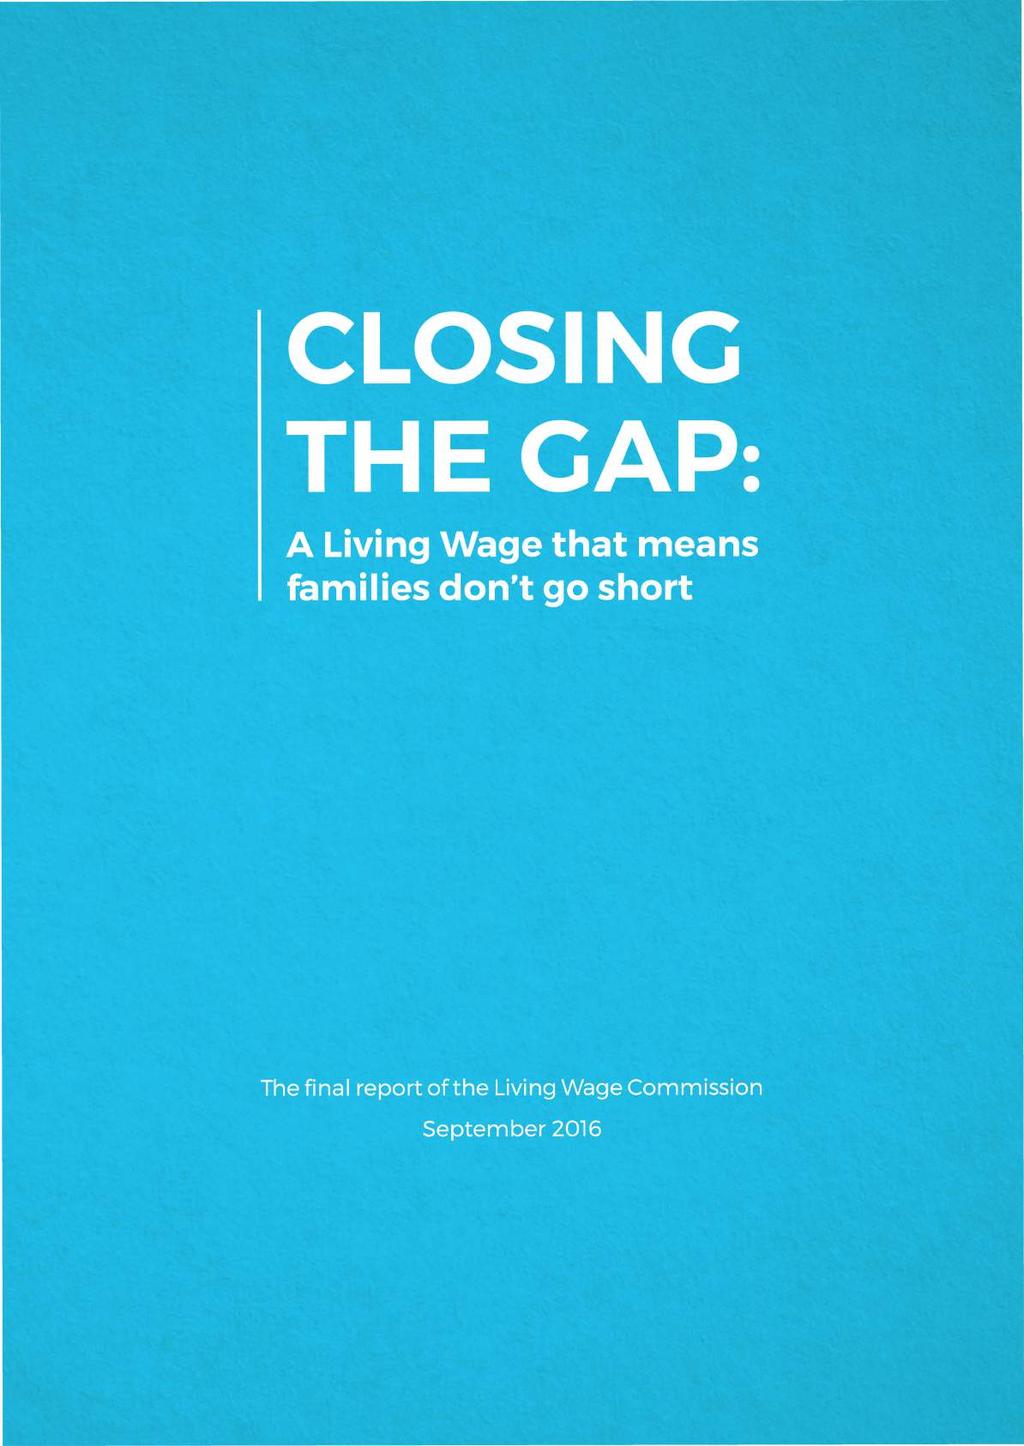 CLOSING THE CAP: A Living Wage that means families don't go